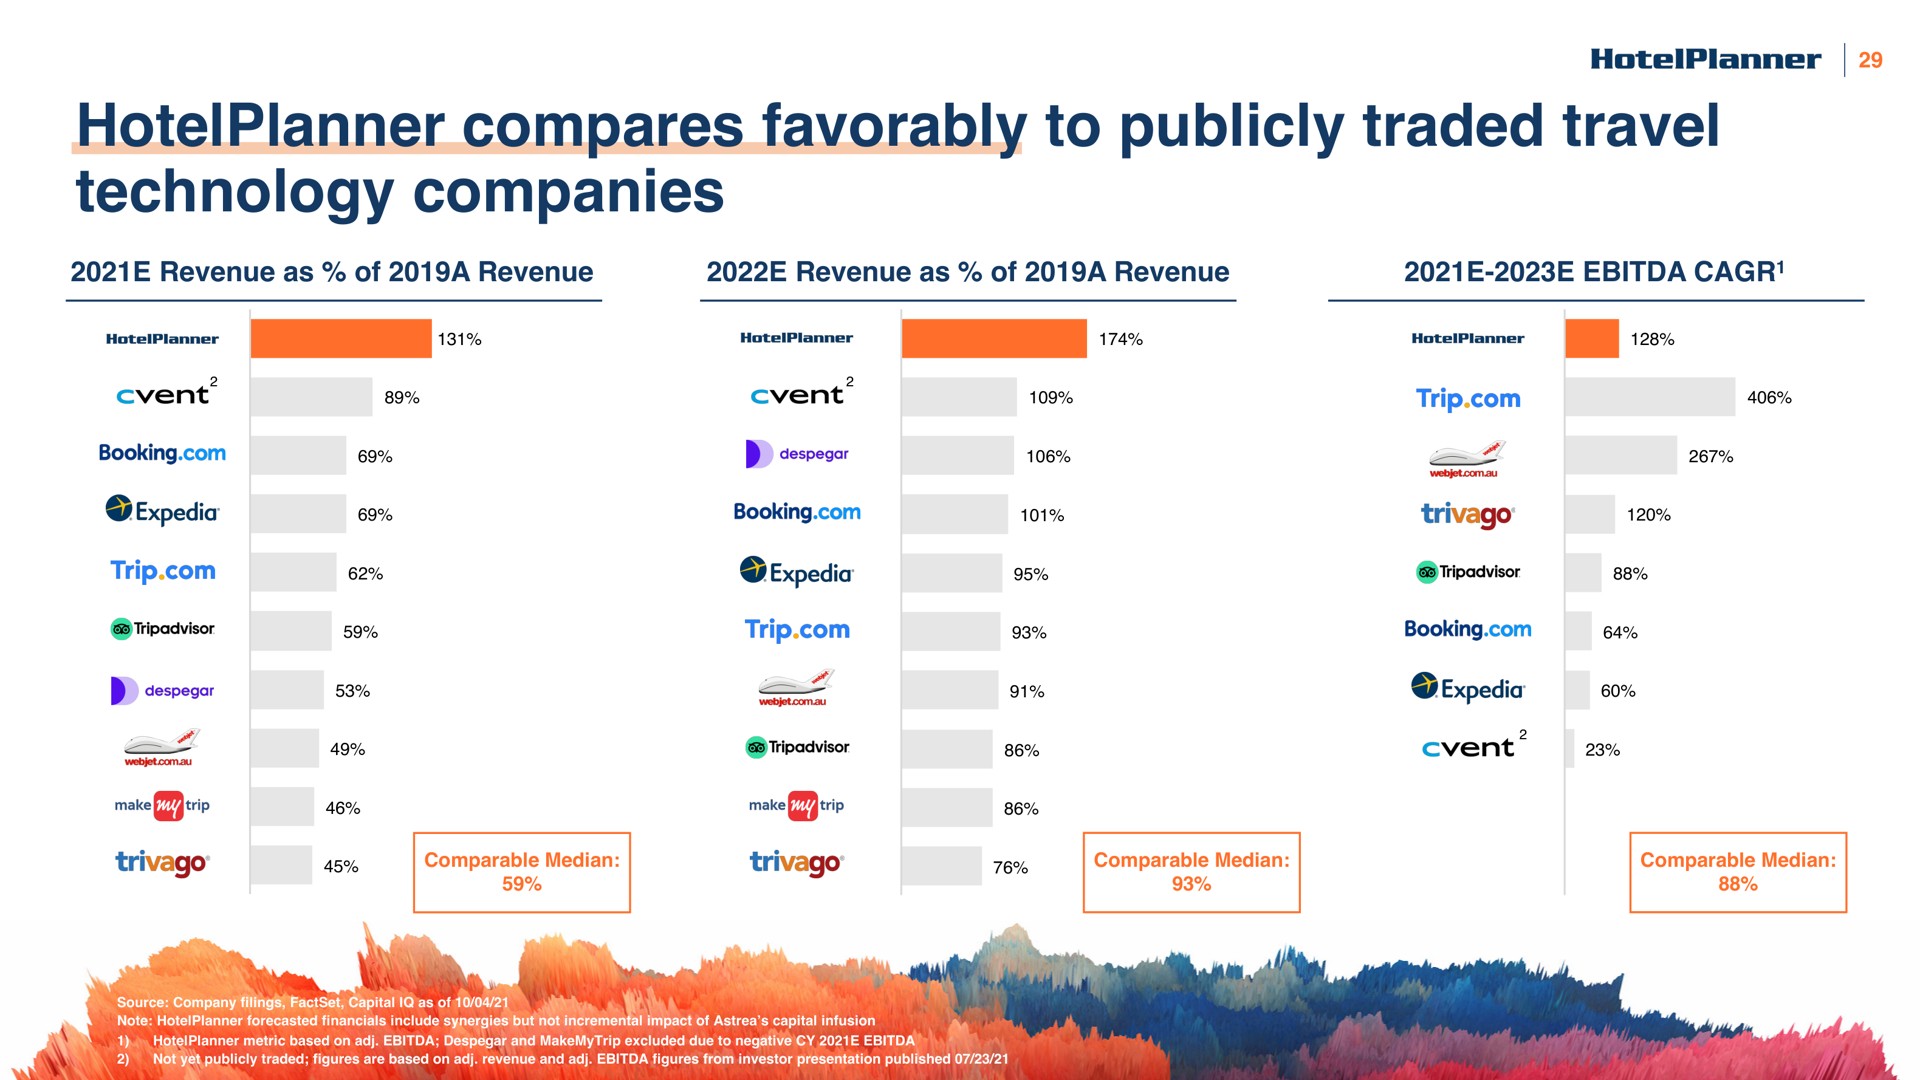 compares favorably to publicly traded travel technology companies | HotelPlanner